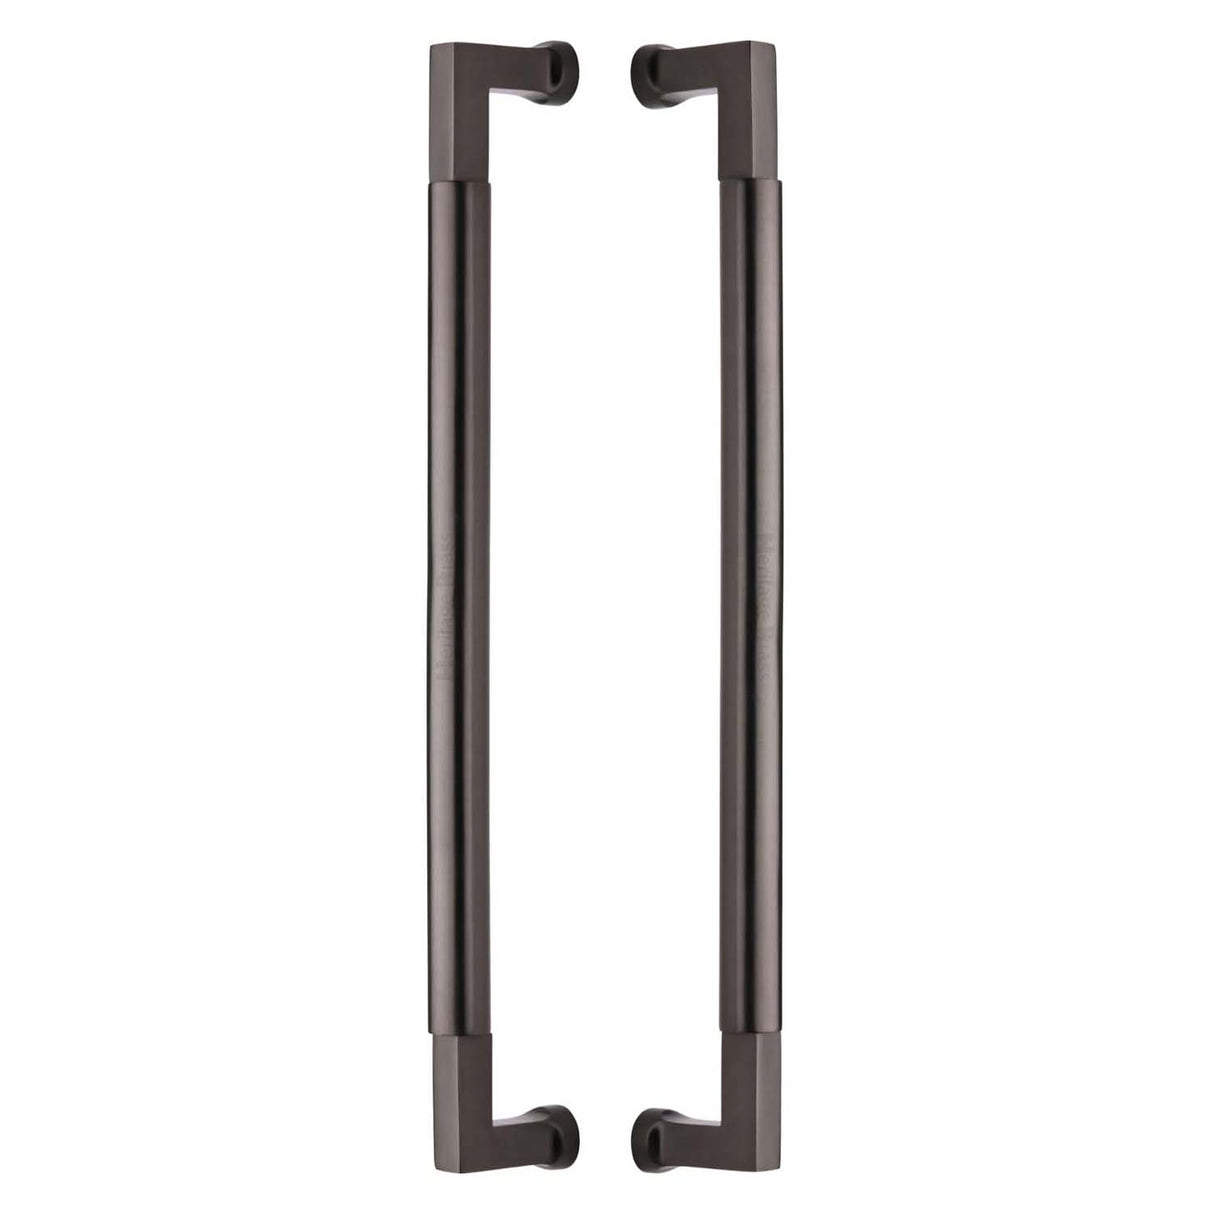 This is an image of a Heritage Brass - Door Pull Handle Bauhaus Design 483mm Matt Bronze Finish, btb1312-483-mb that is available to order from Trade Door Handles in Kendal.